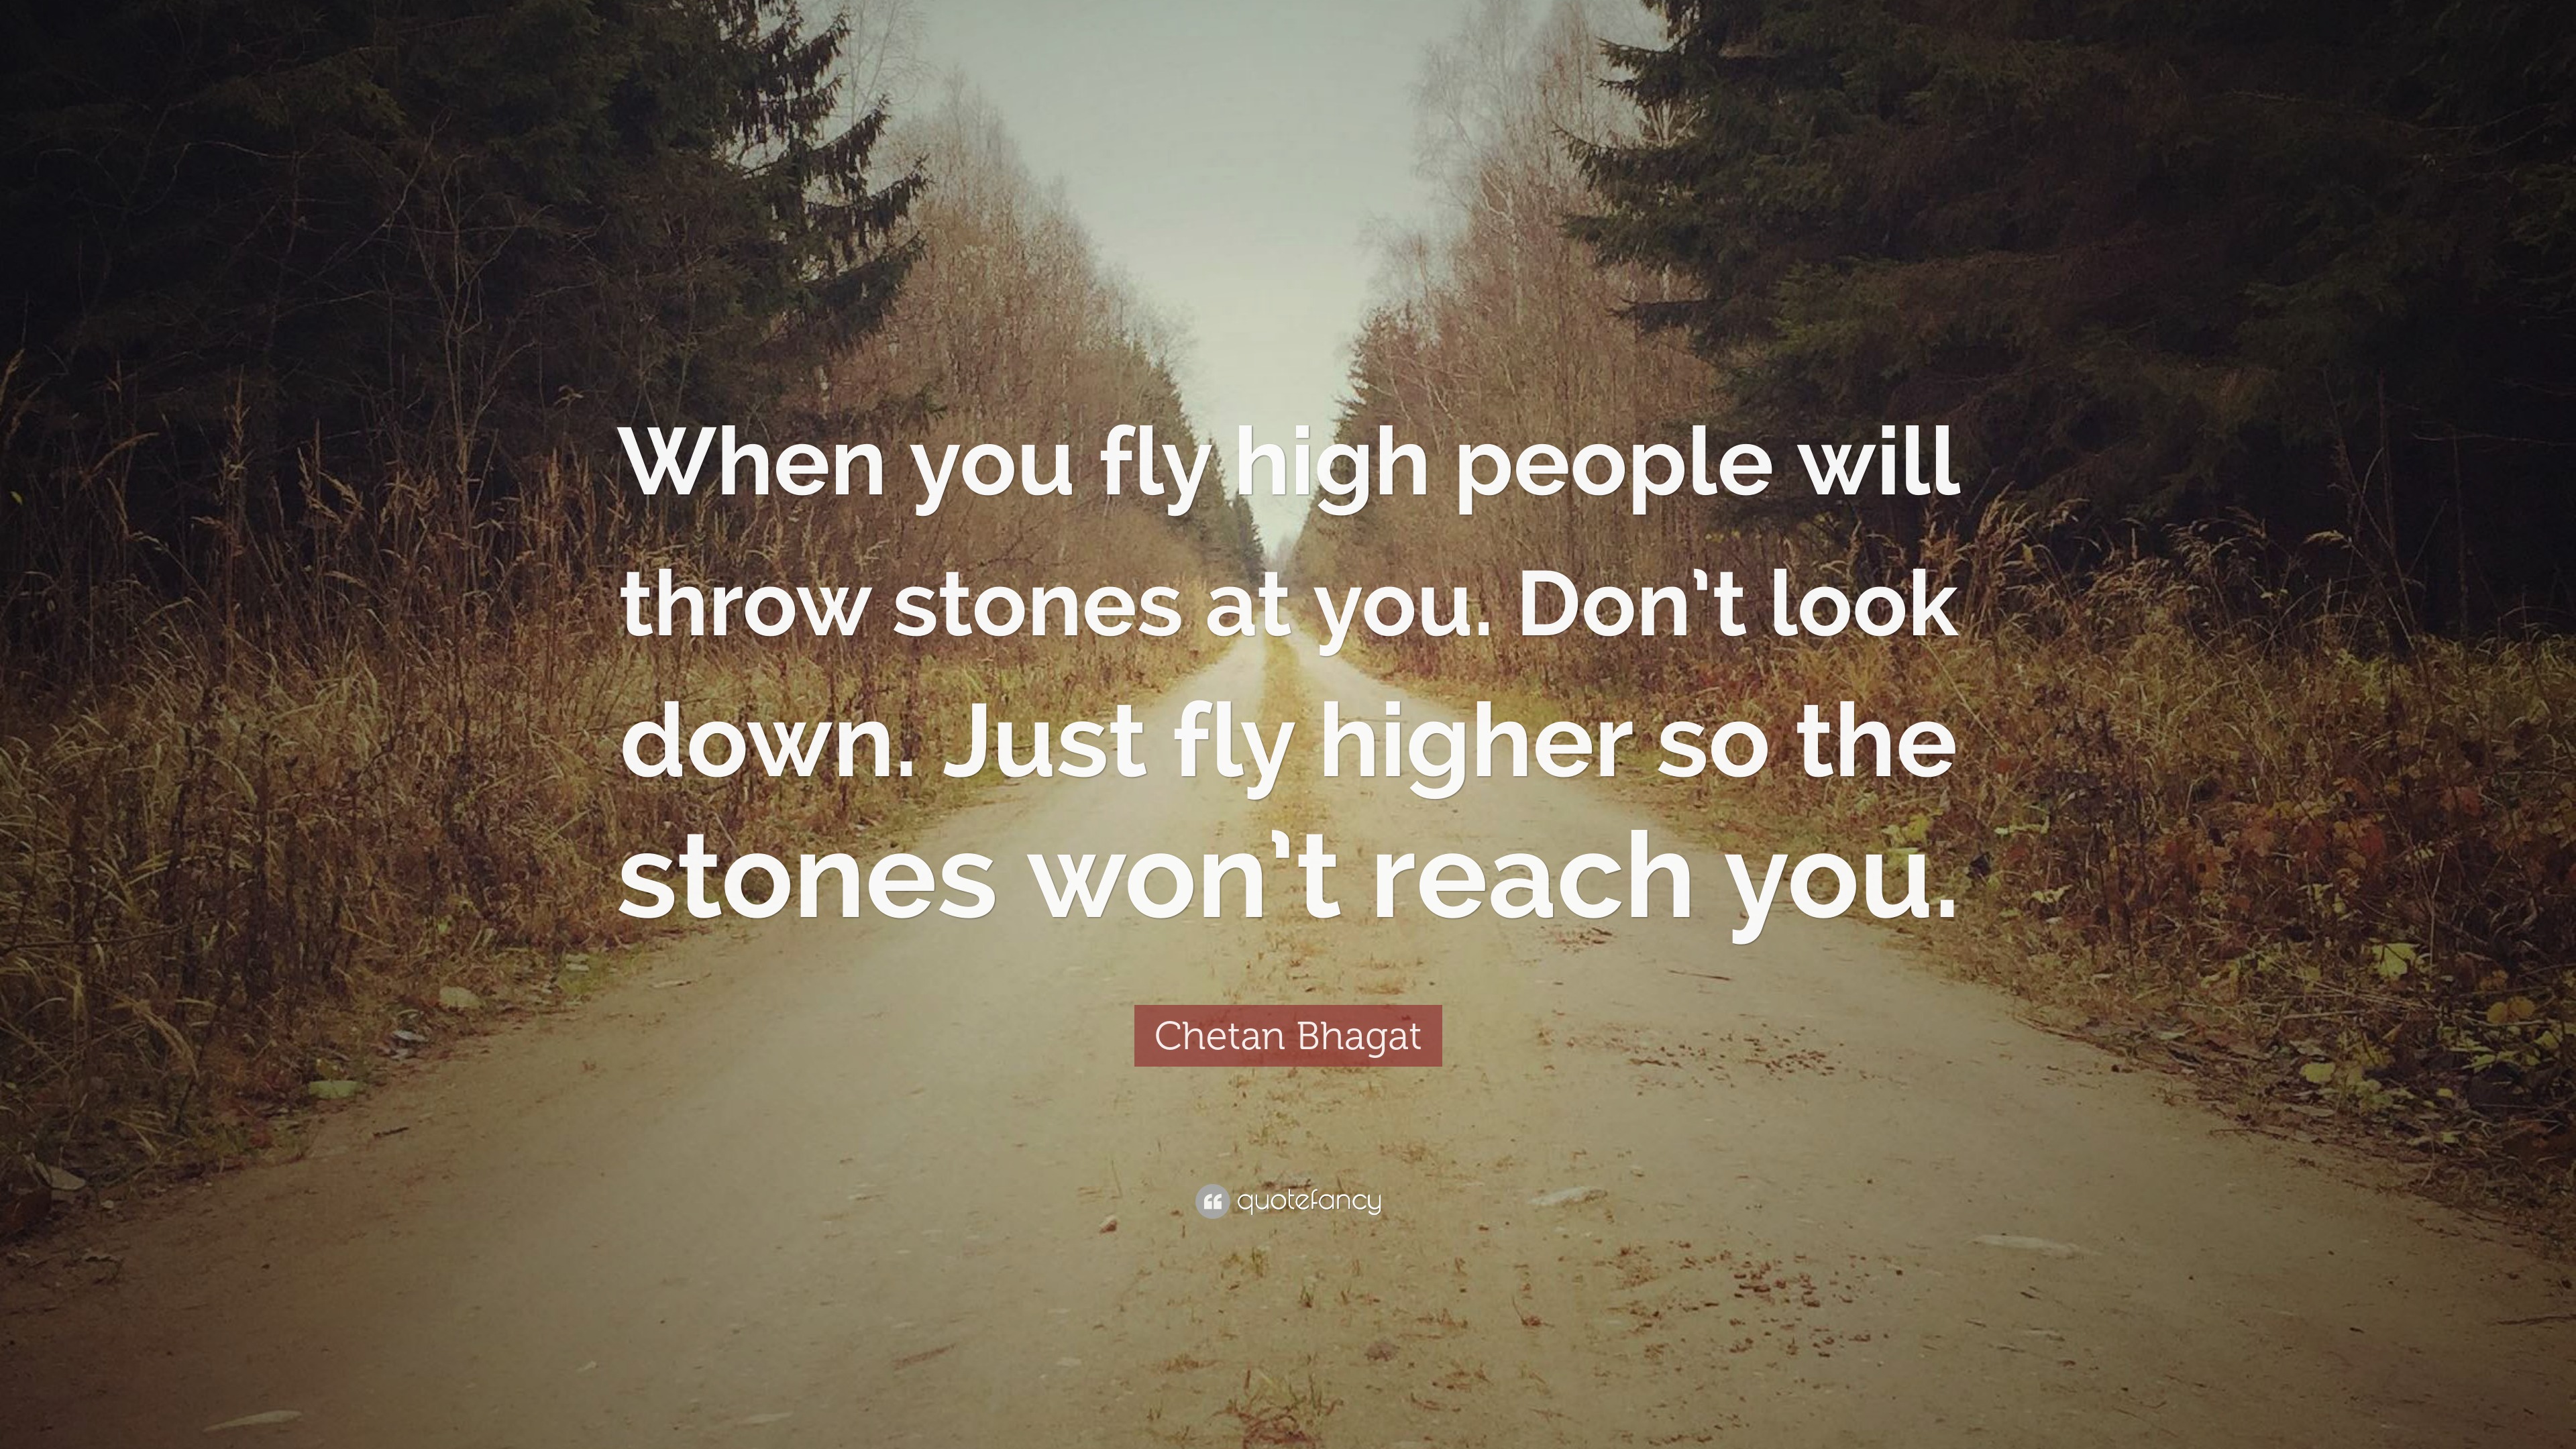 Chetan Bhagat Quote: "When you fly high people will throw stones at you. Don't look down. Just ...